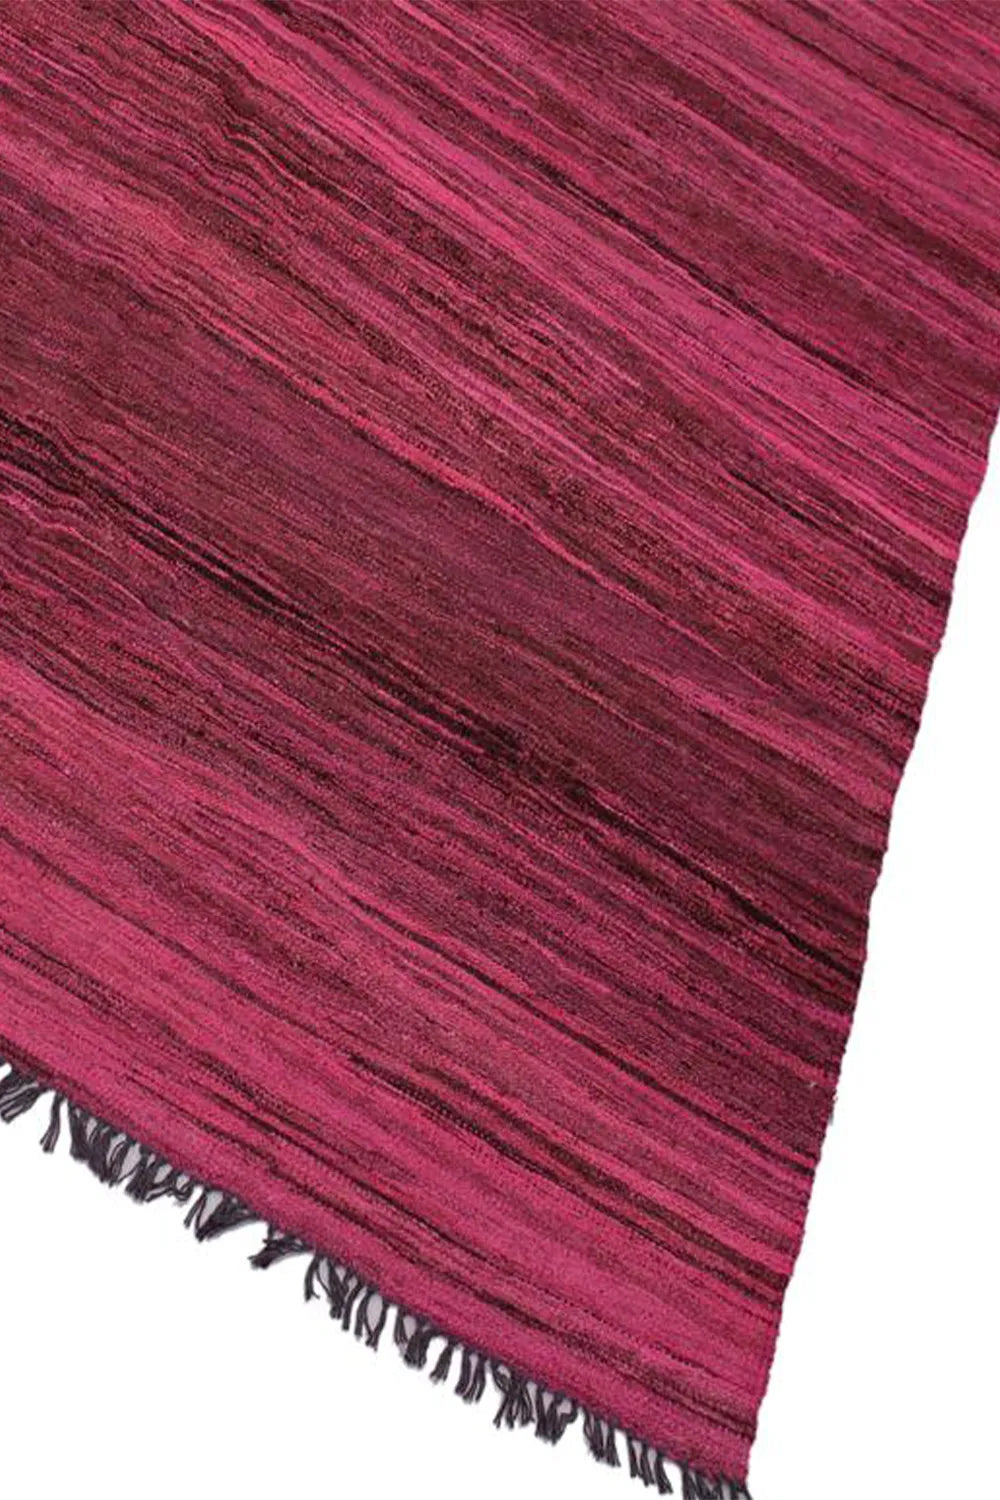 artisan-crafted tribal pink throw wool rug, ideal for a statement floor piece with fringe